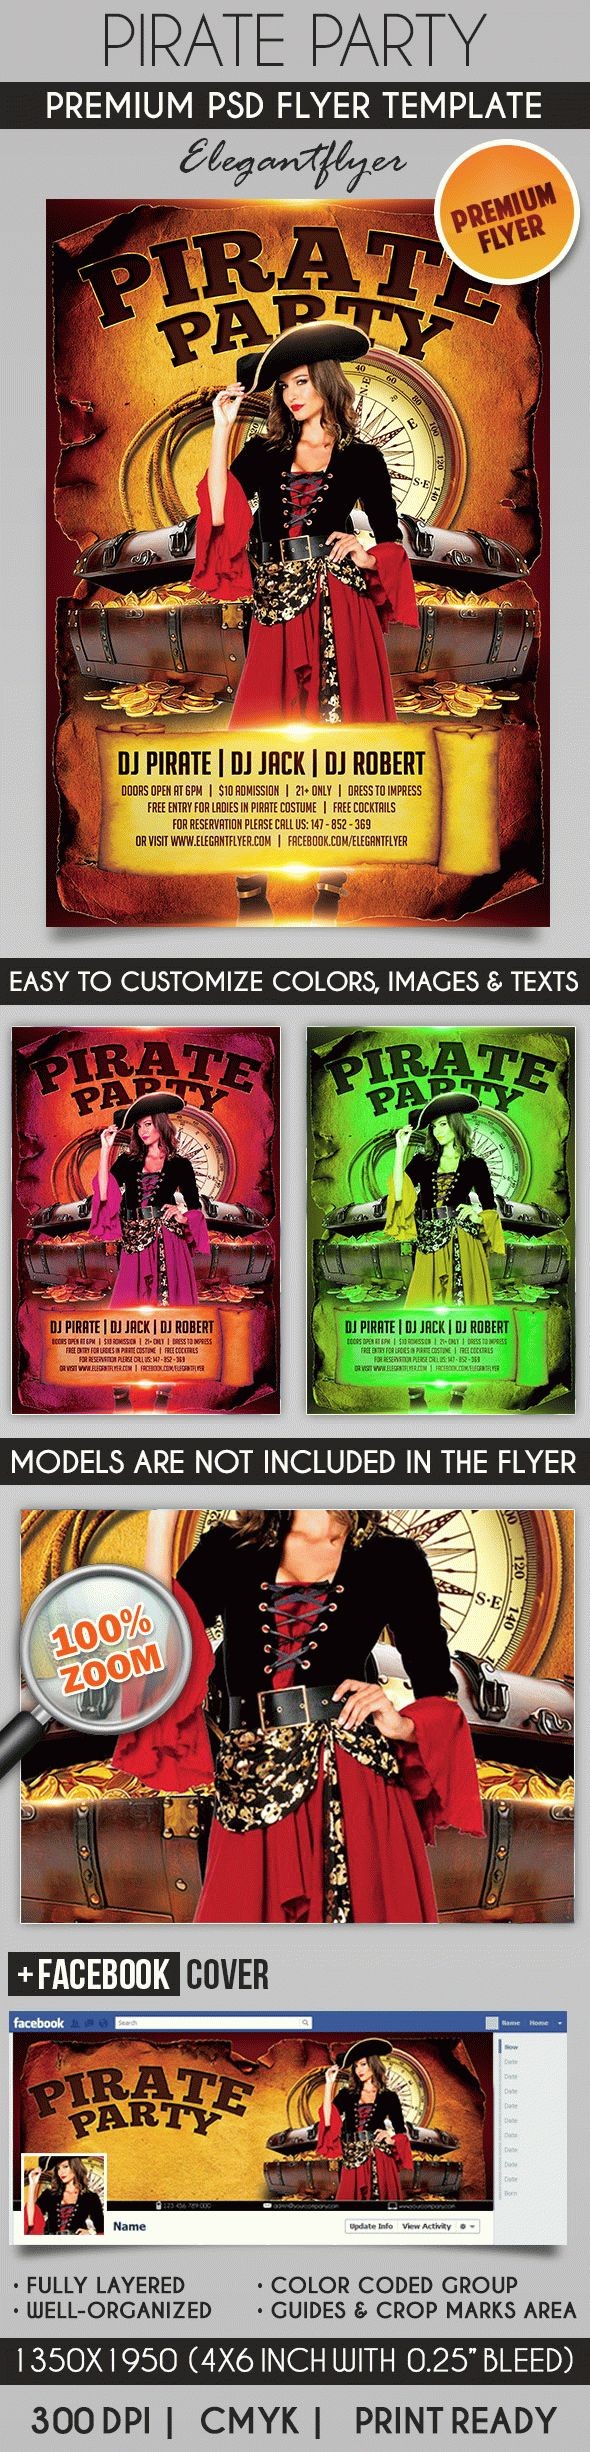 Invitations to a Pirate Party by ElegantFlyer